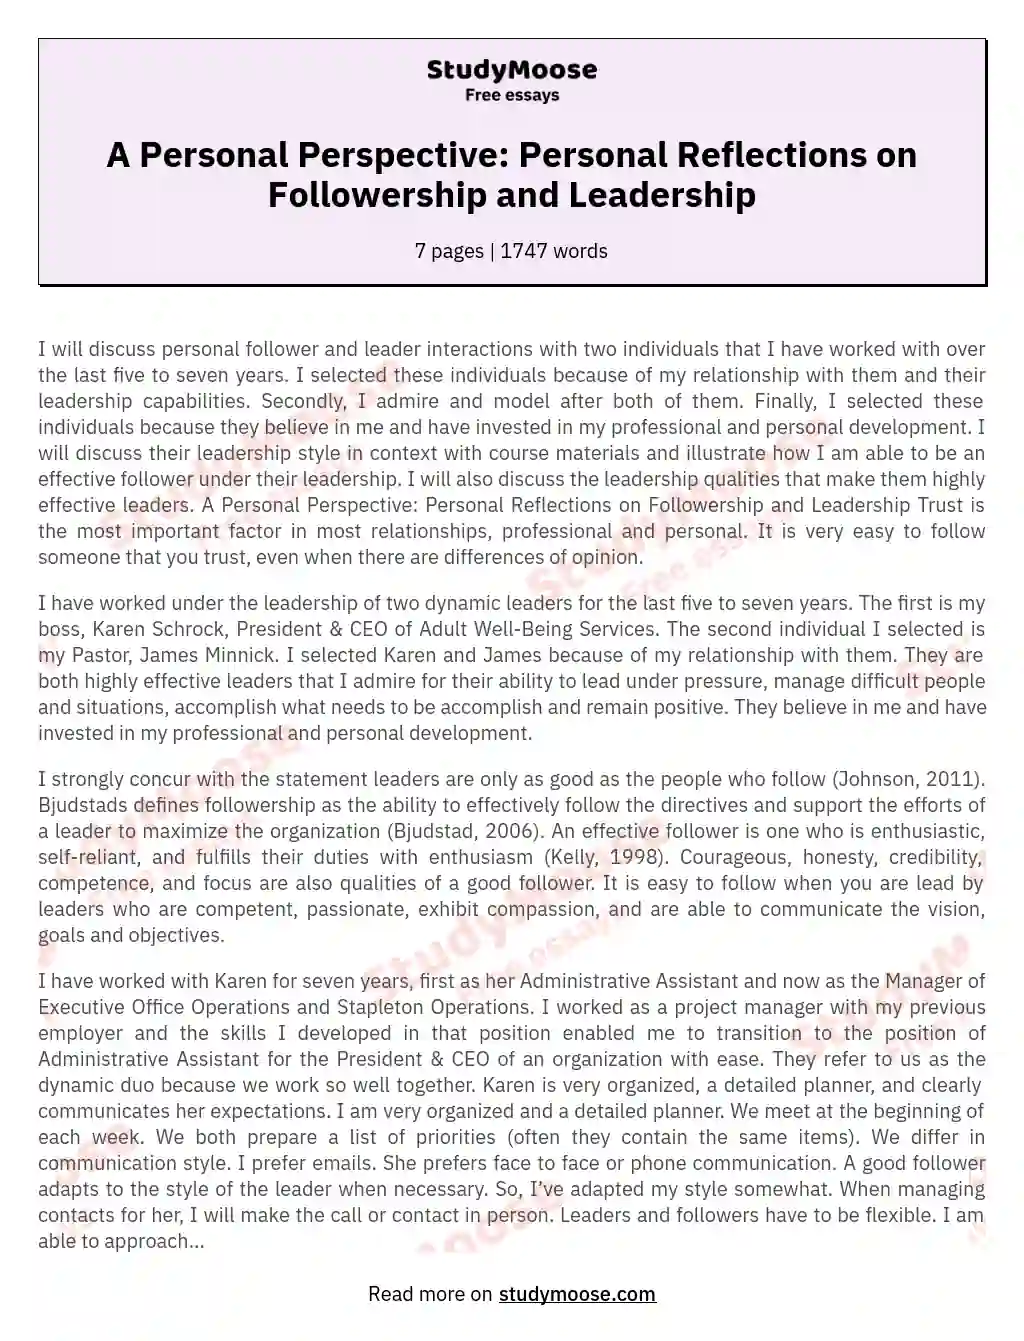 A Personal Perspective: Personal Reflections on Followership and Leadership